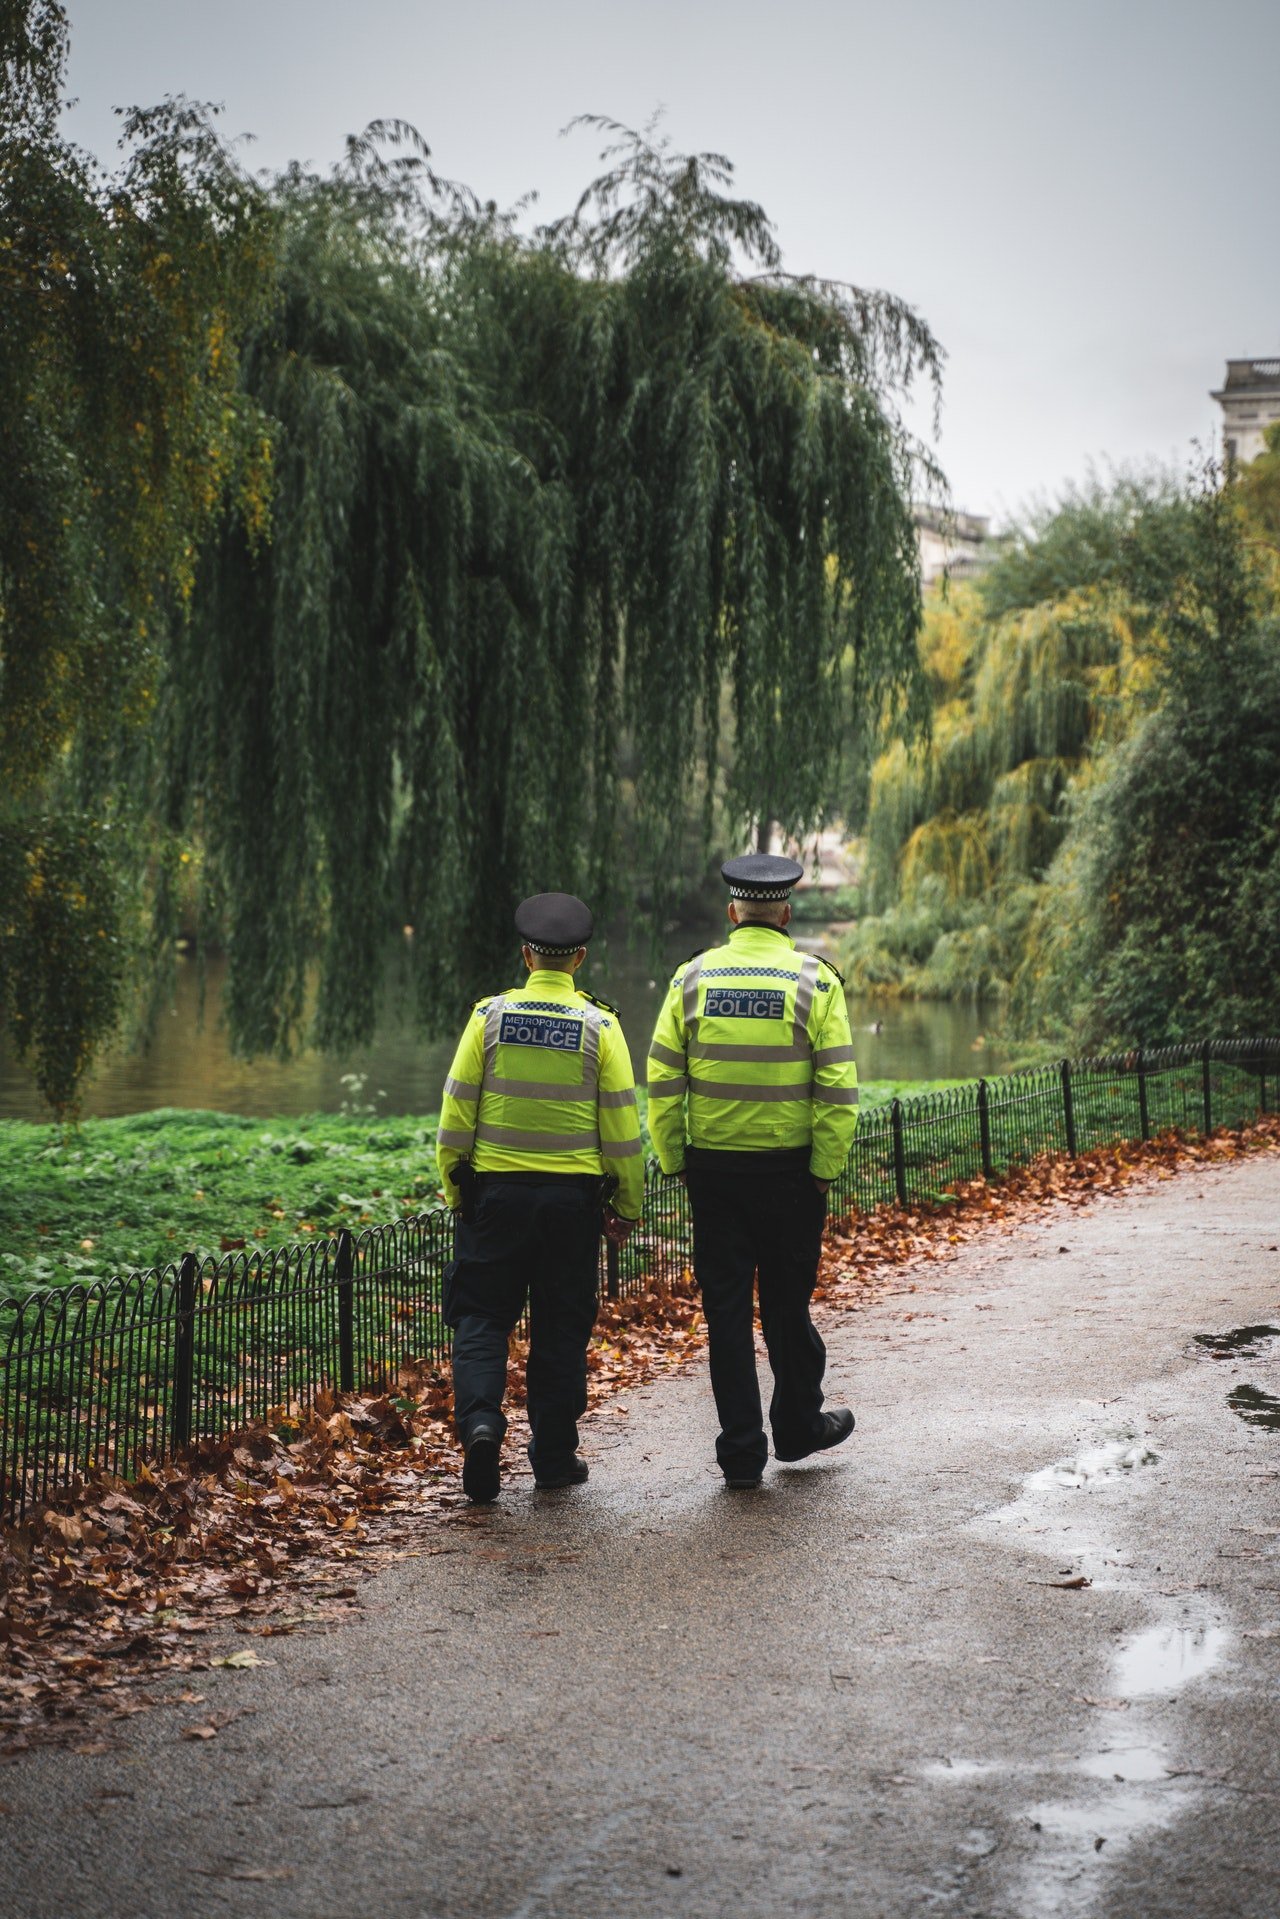 Two police officers walking along the road | Photo: Pexels